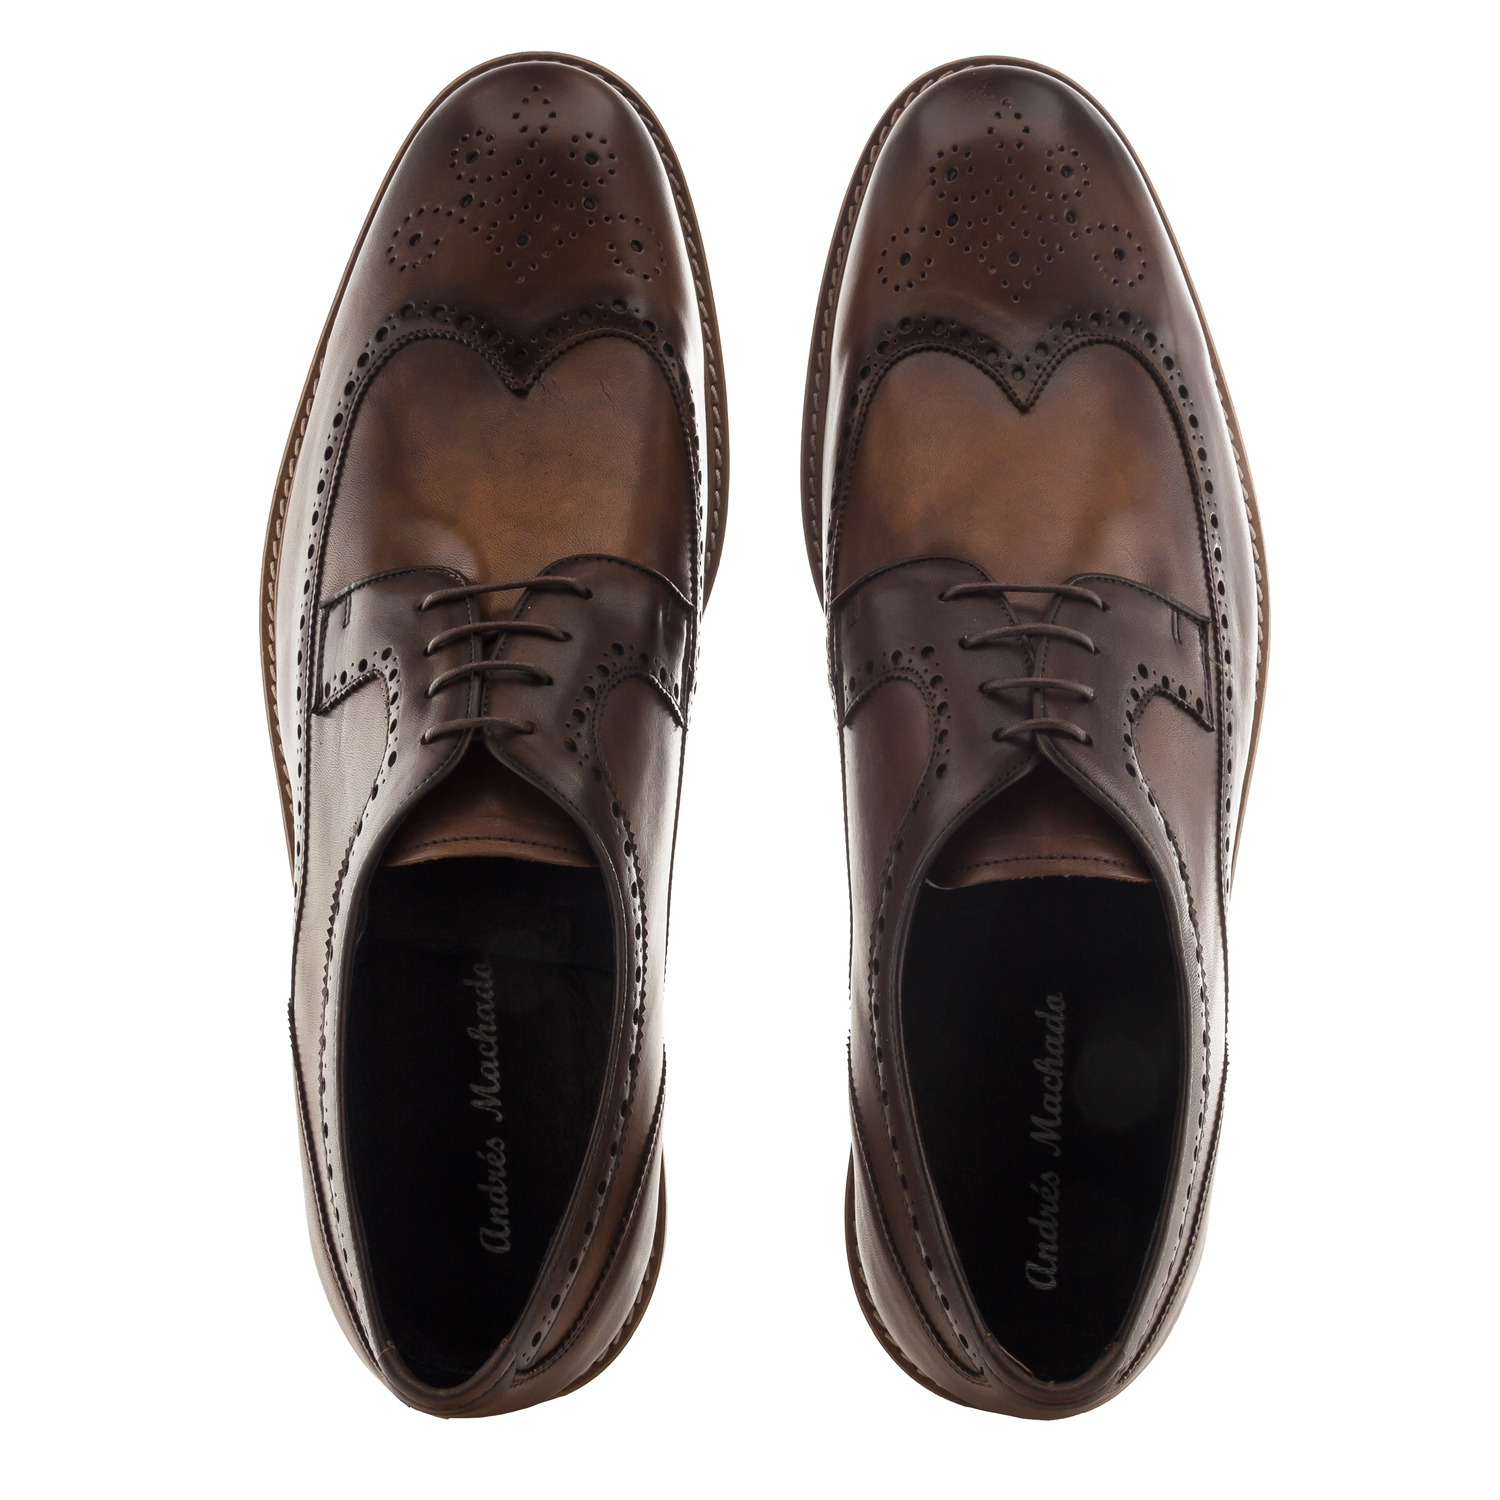 Oxford style Shoes in Brown Leather 